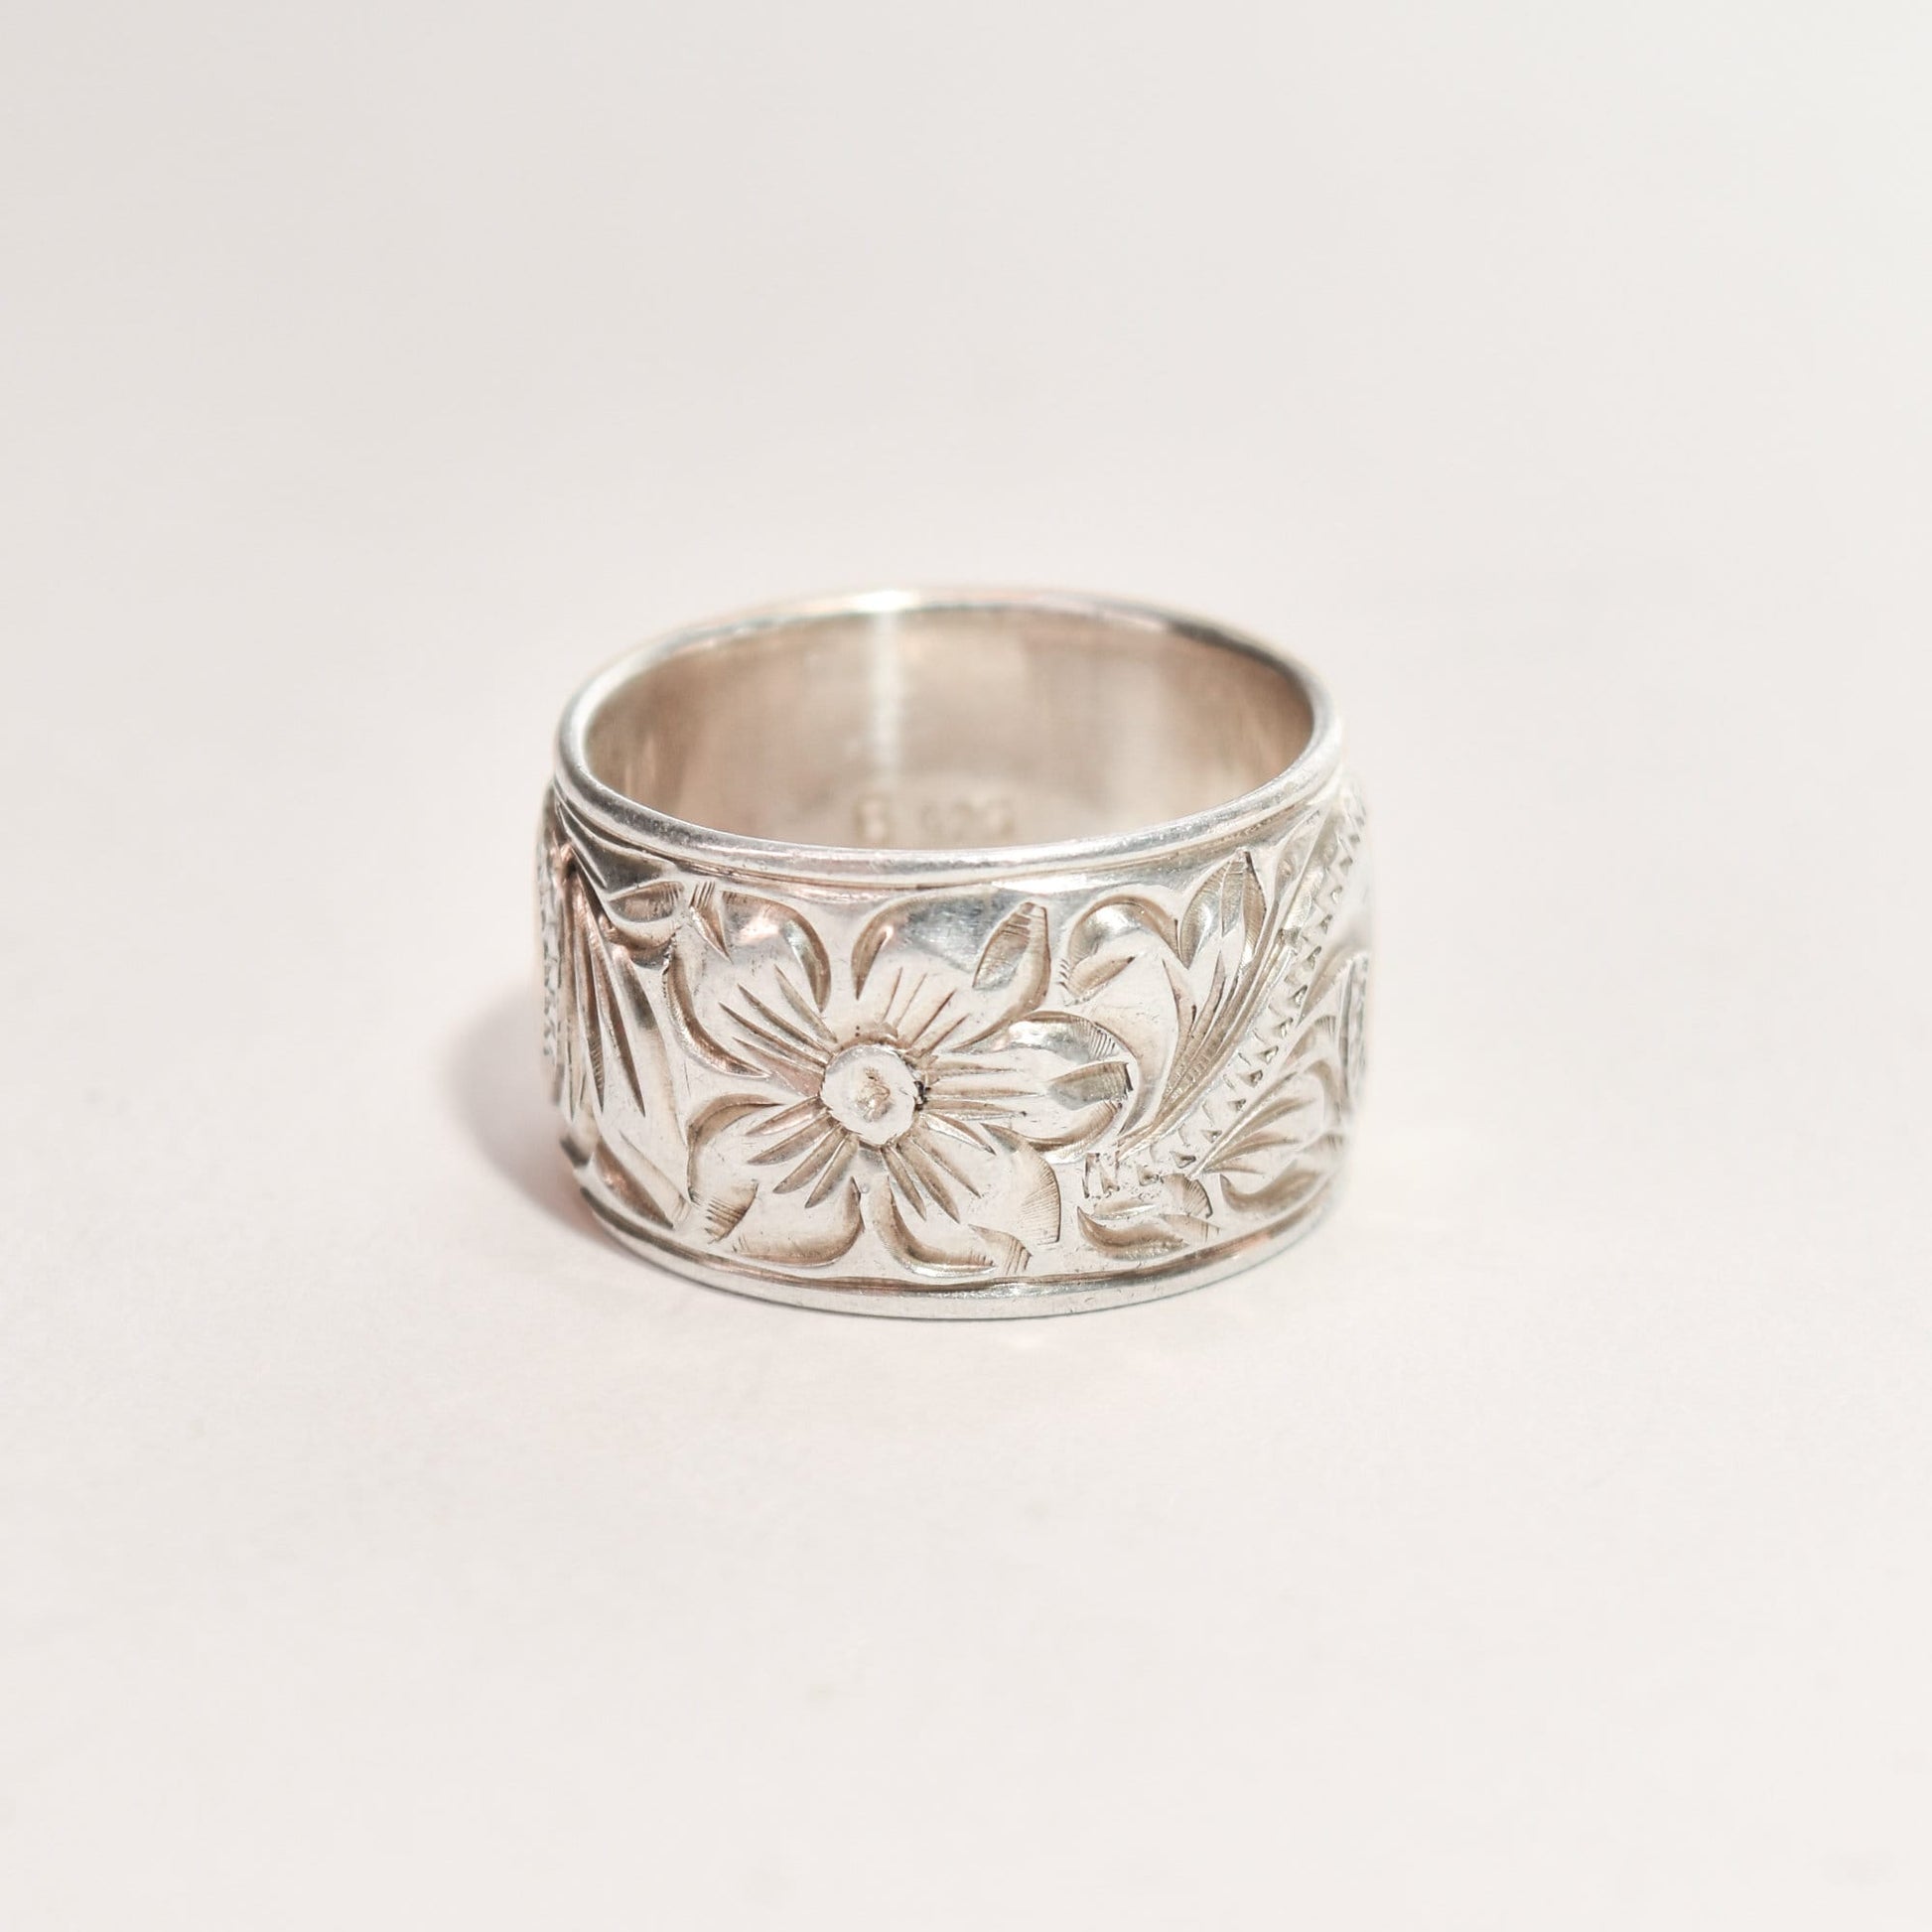 Floral-engraved sterling silver band ring, 11.5mm wide with Art Nouveau revival pattern, size 6 US, displayed on a neutral background.